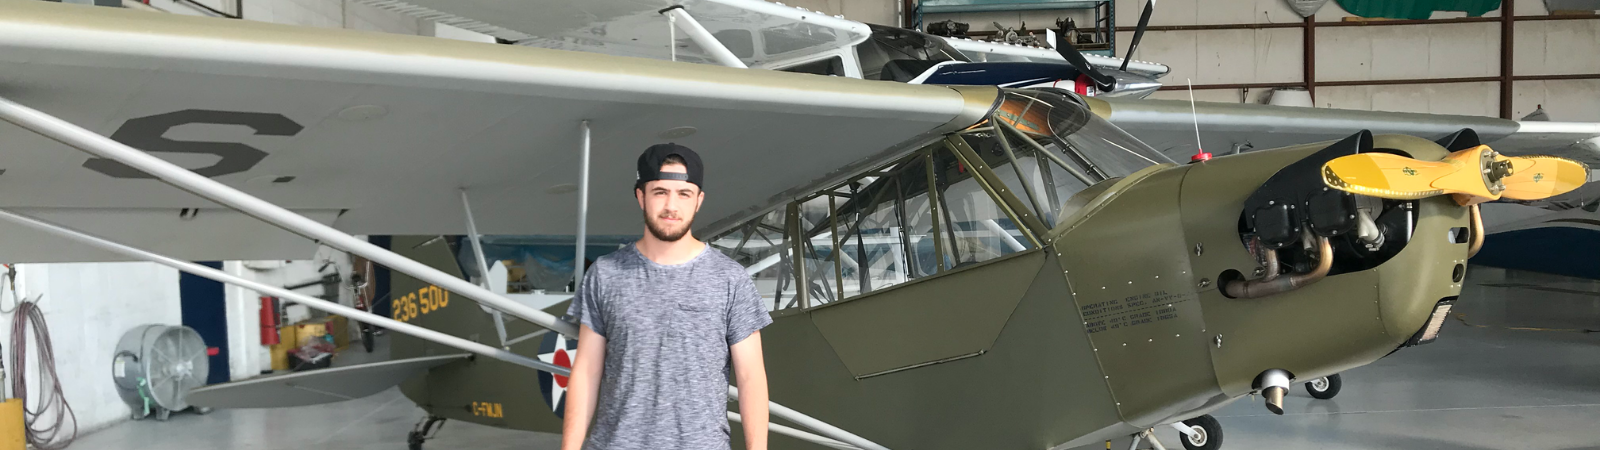 student standing in front of airplane